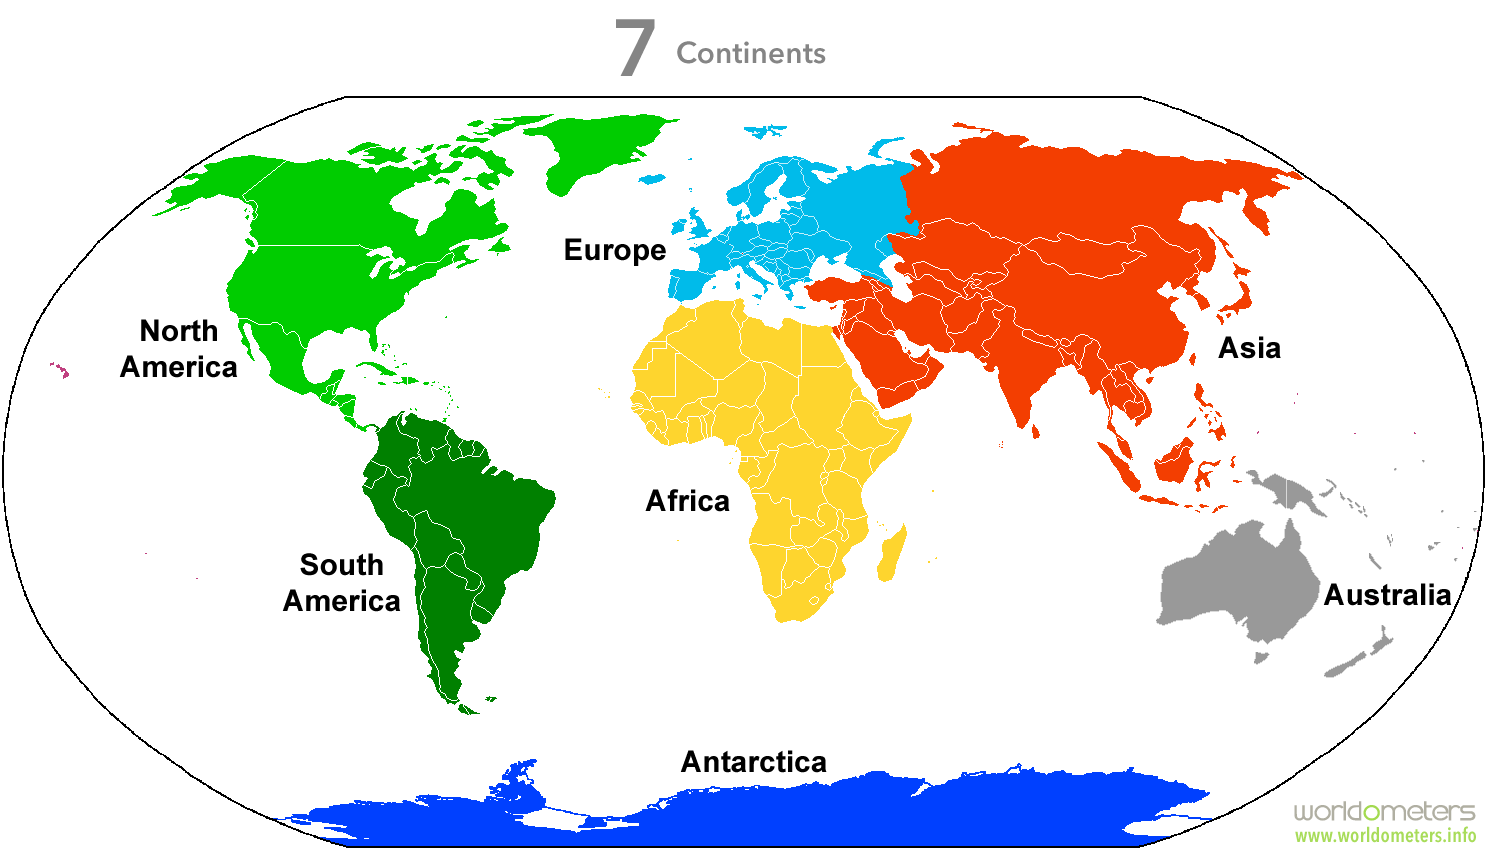 7-continents-of-the-world-worldometer